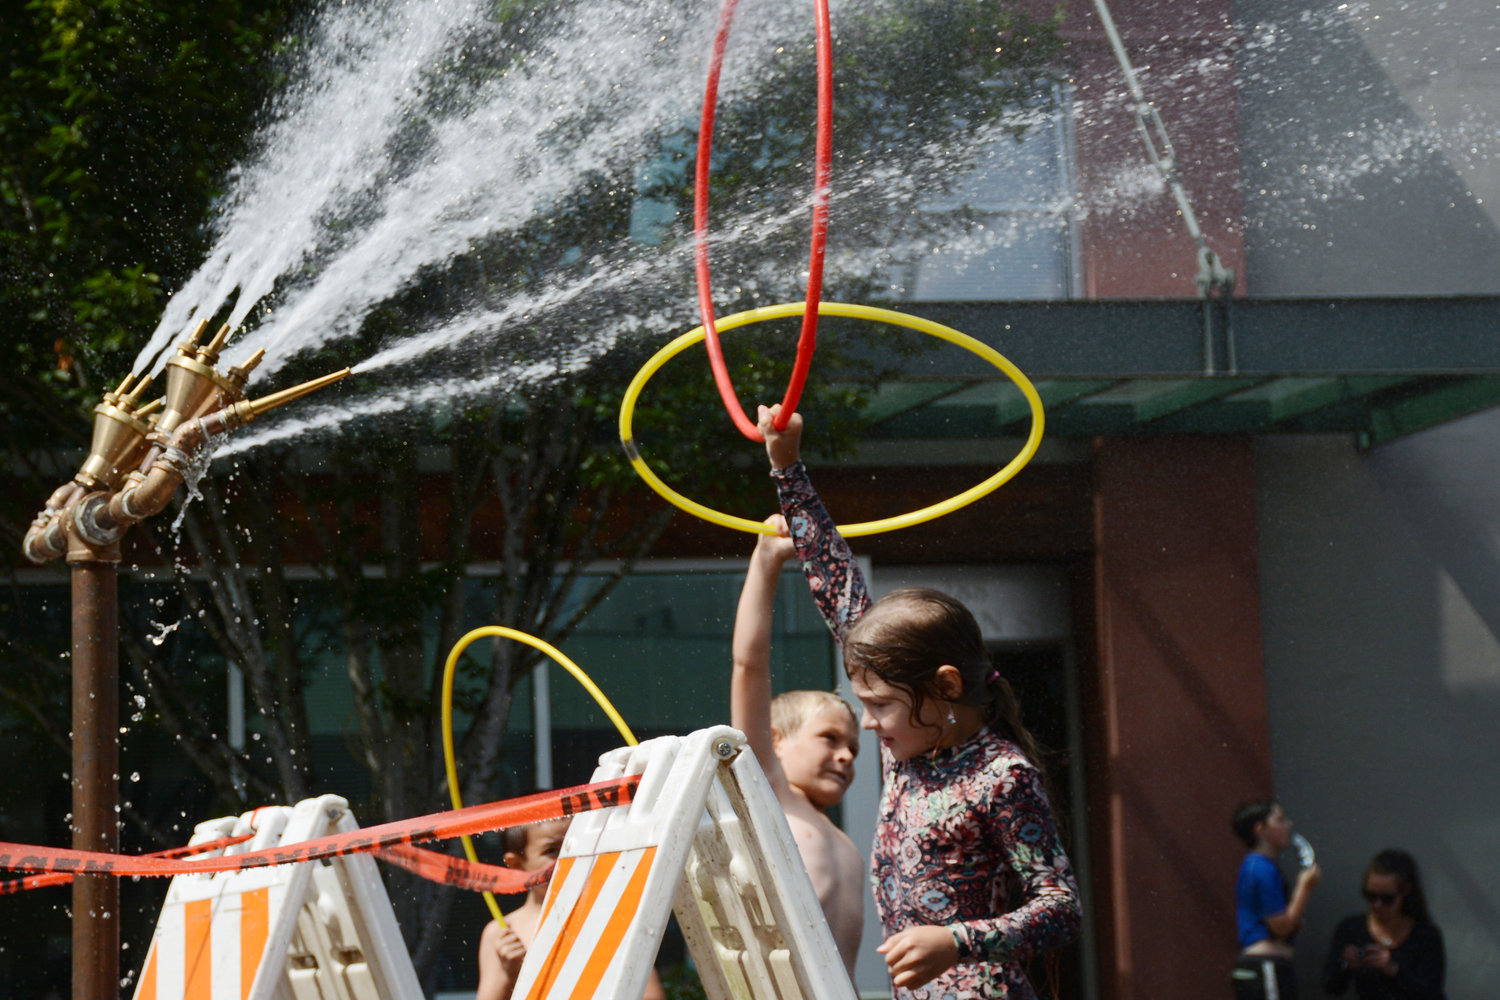 Children run through sprinklers and fire hydrants on 3rd Street in downtown Blaine during Splash Days, put on by Blaine-Birch Bay Park and Recreation District 2 and the city of Blaine August 12.